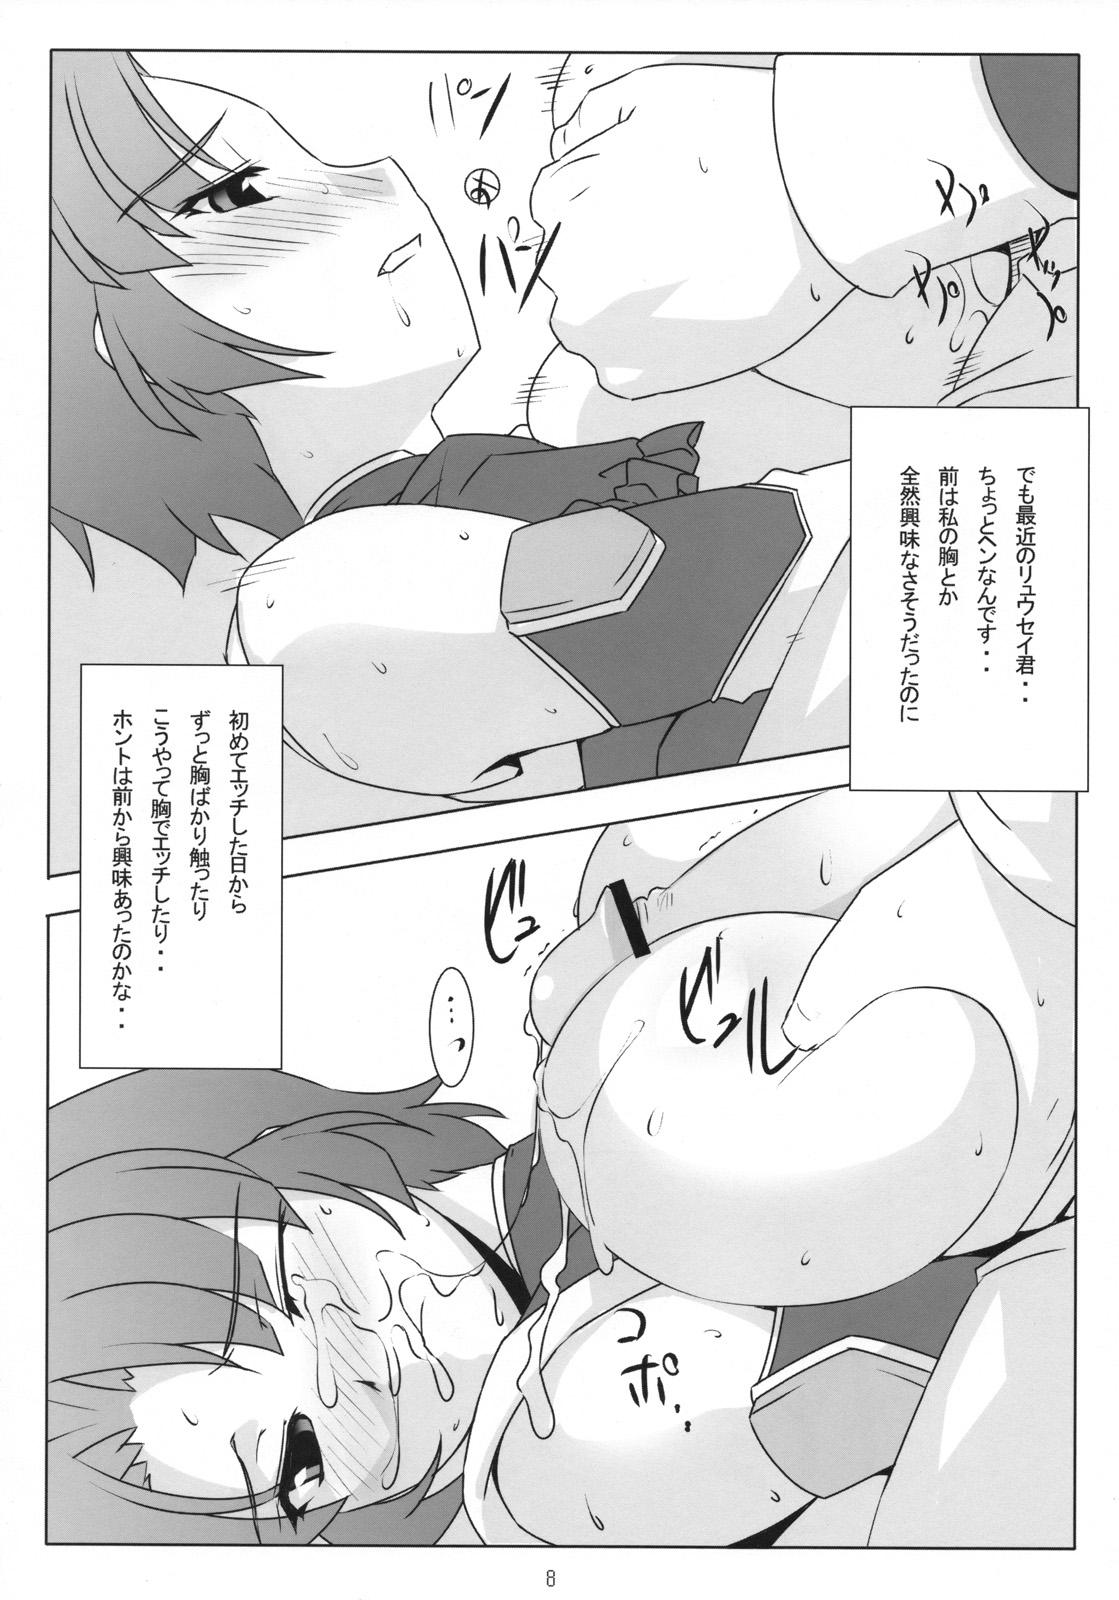 (C71) [NF121 (Midori Aoi)] CHEMICAL SOUP (Super Robot Wars) page 7 full